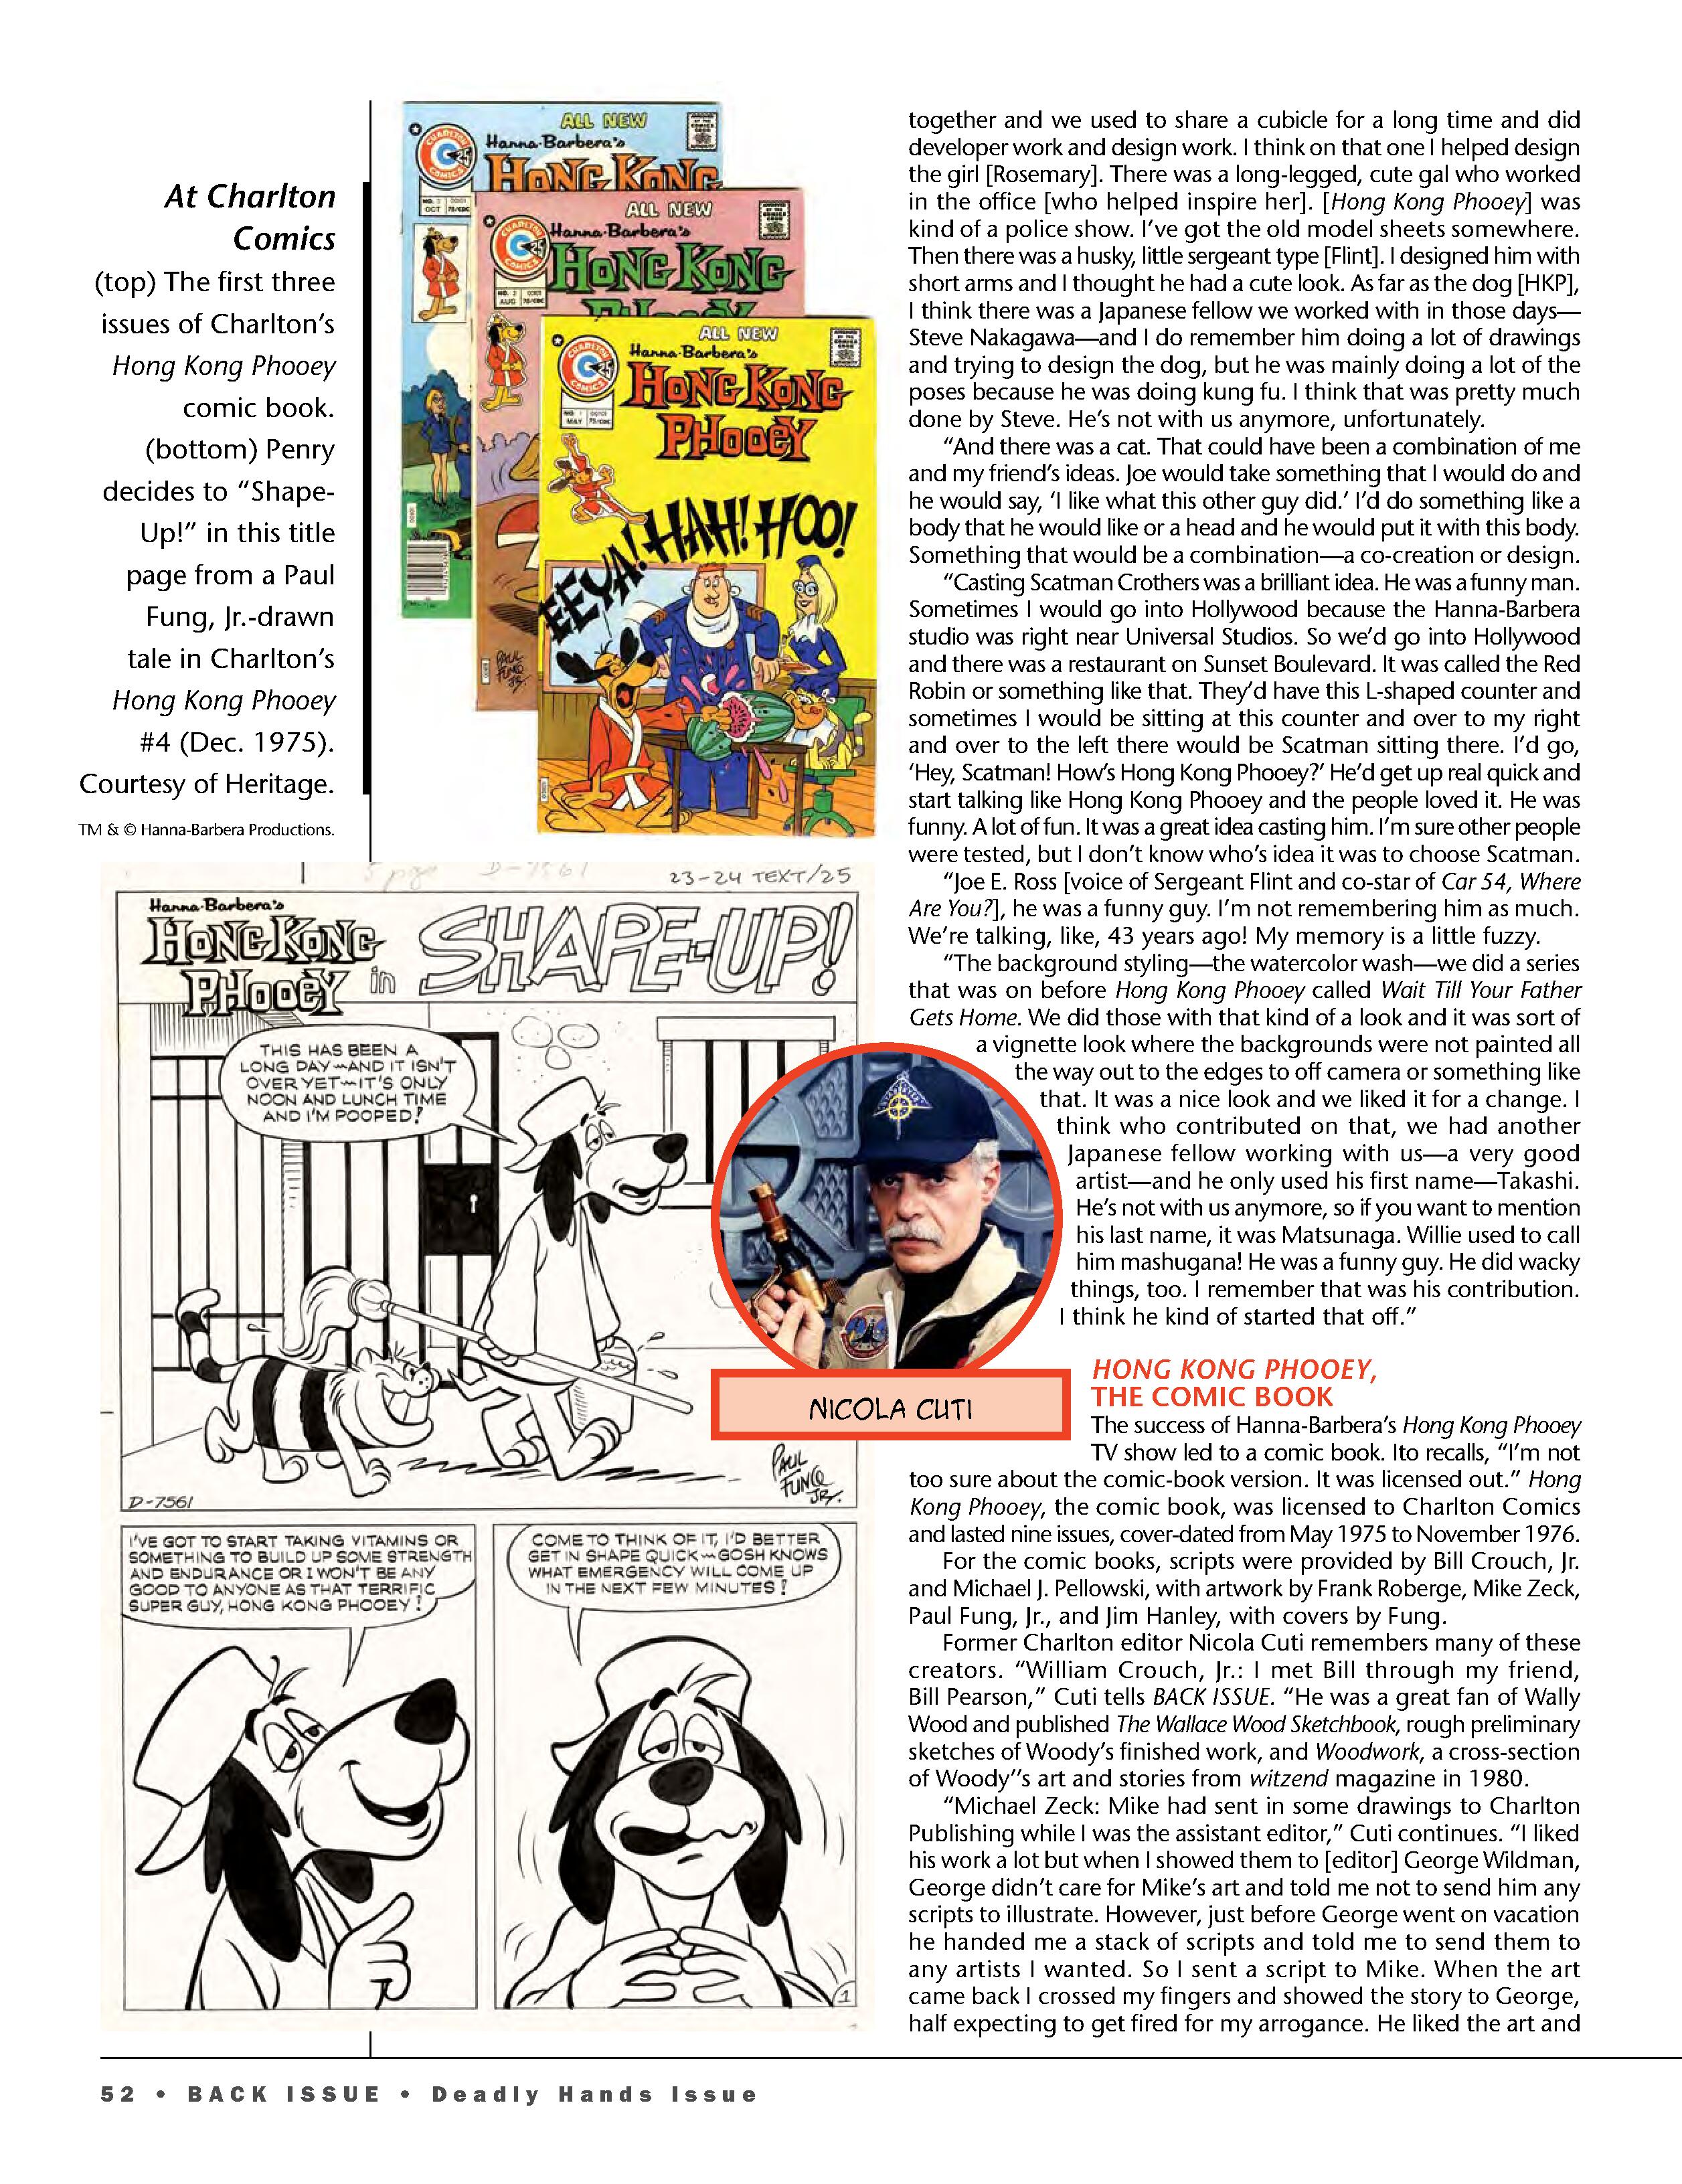 Read online Back Issue comic -  Issue #105 - 54